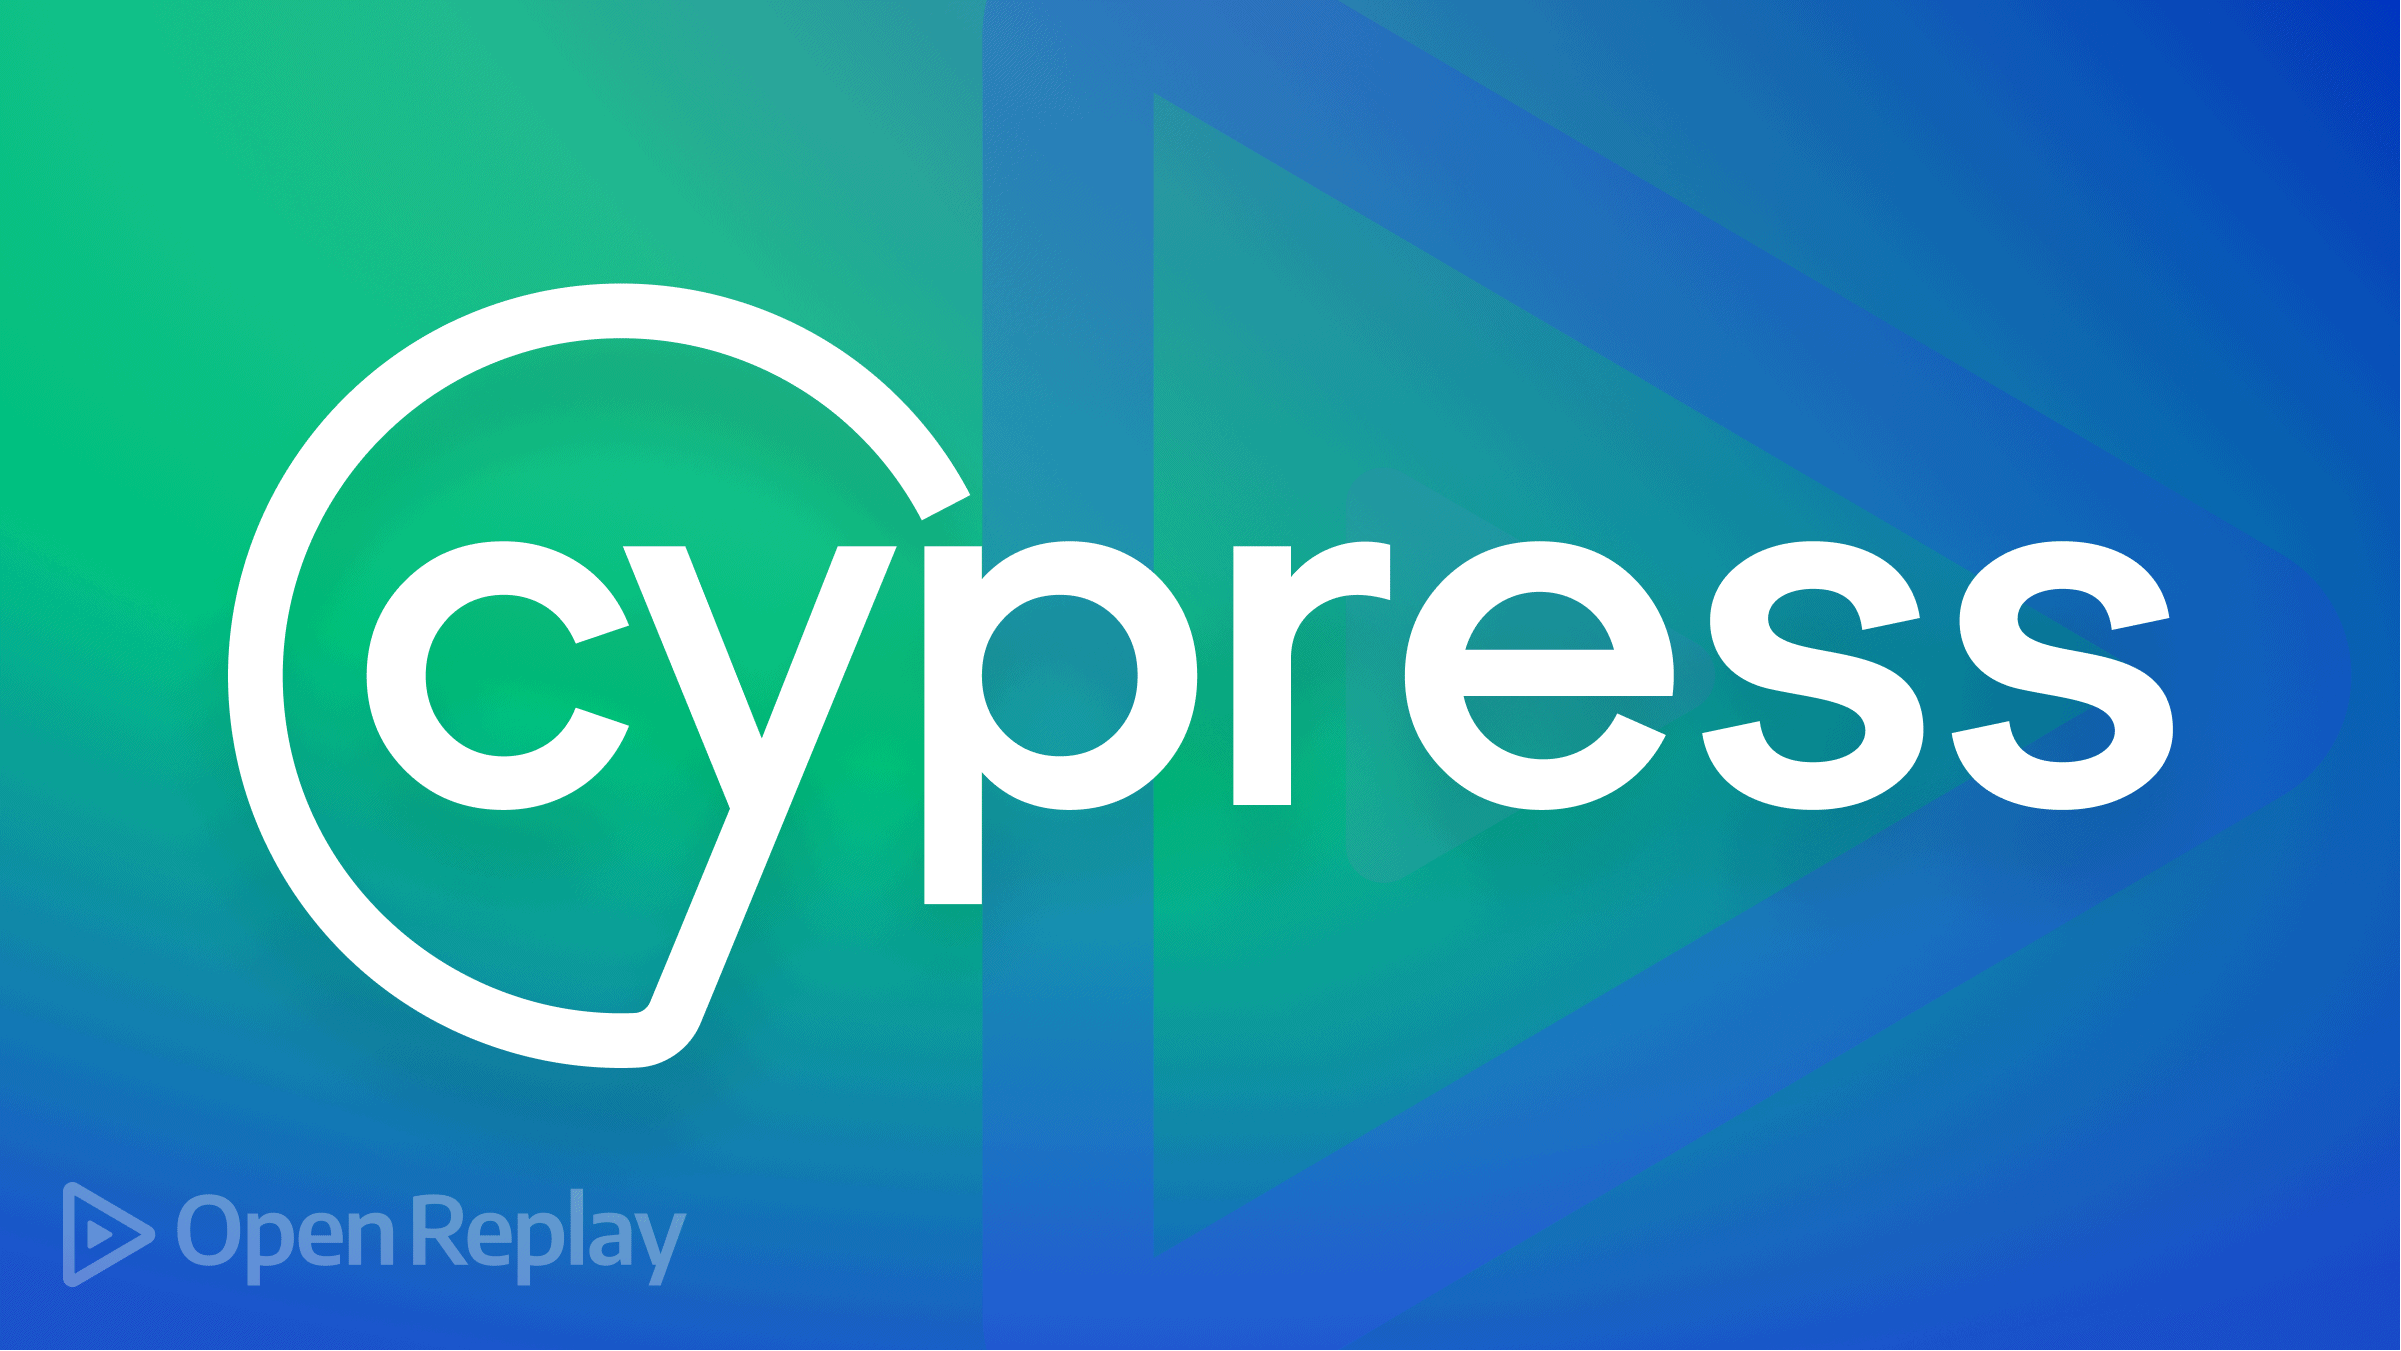 Getting started with Cypress Studio